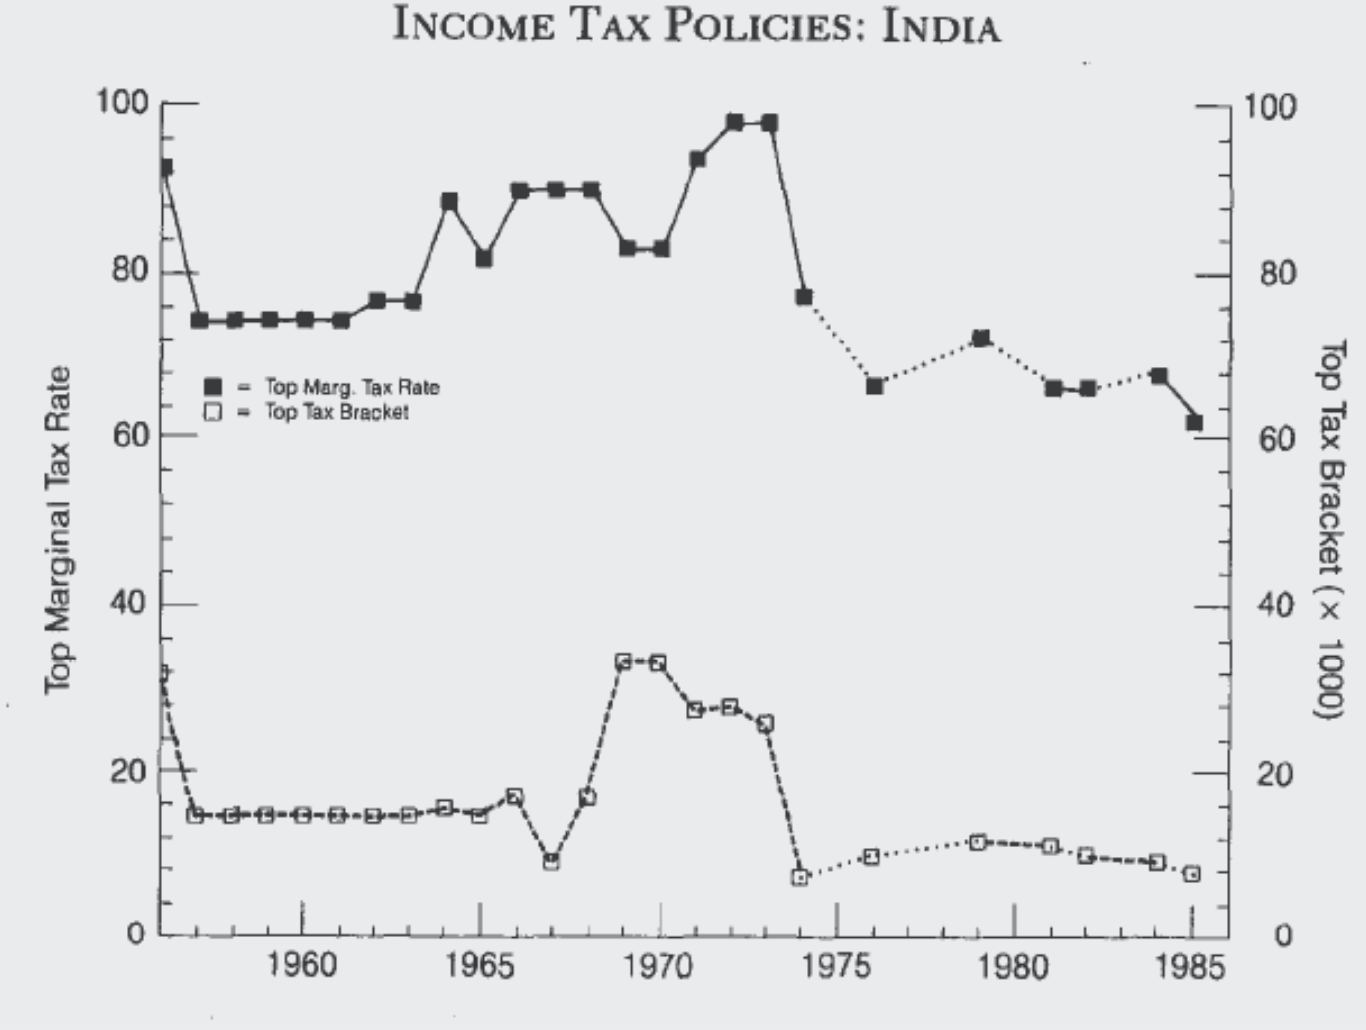 India Tax Rate trends